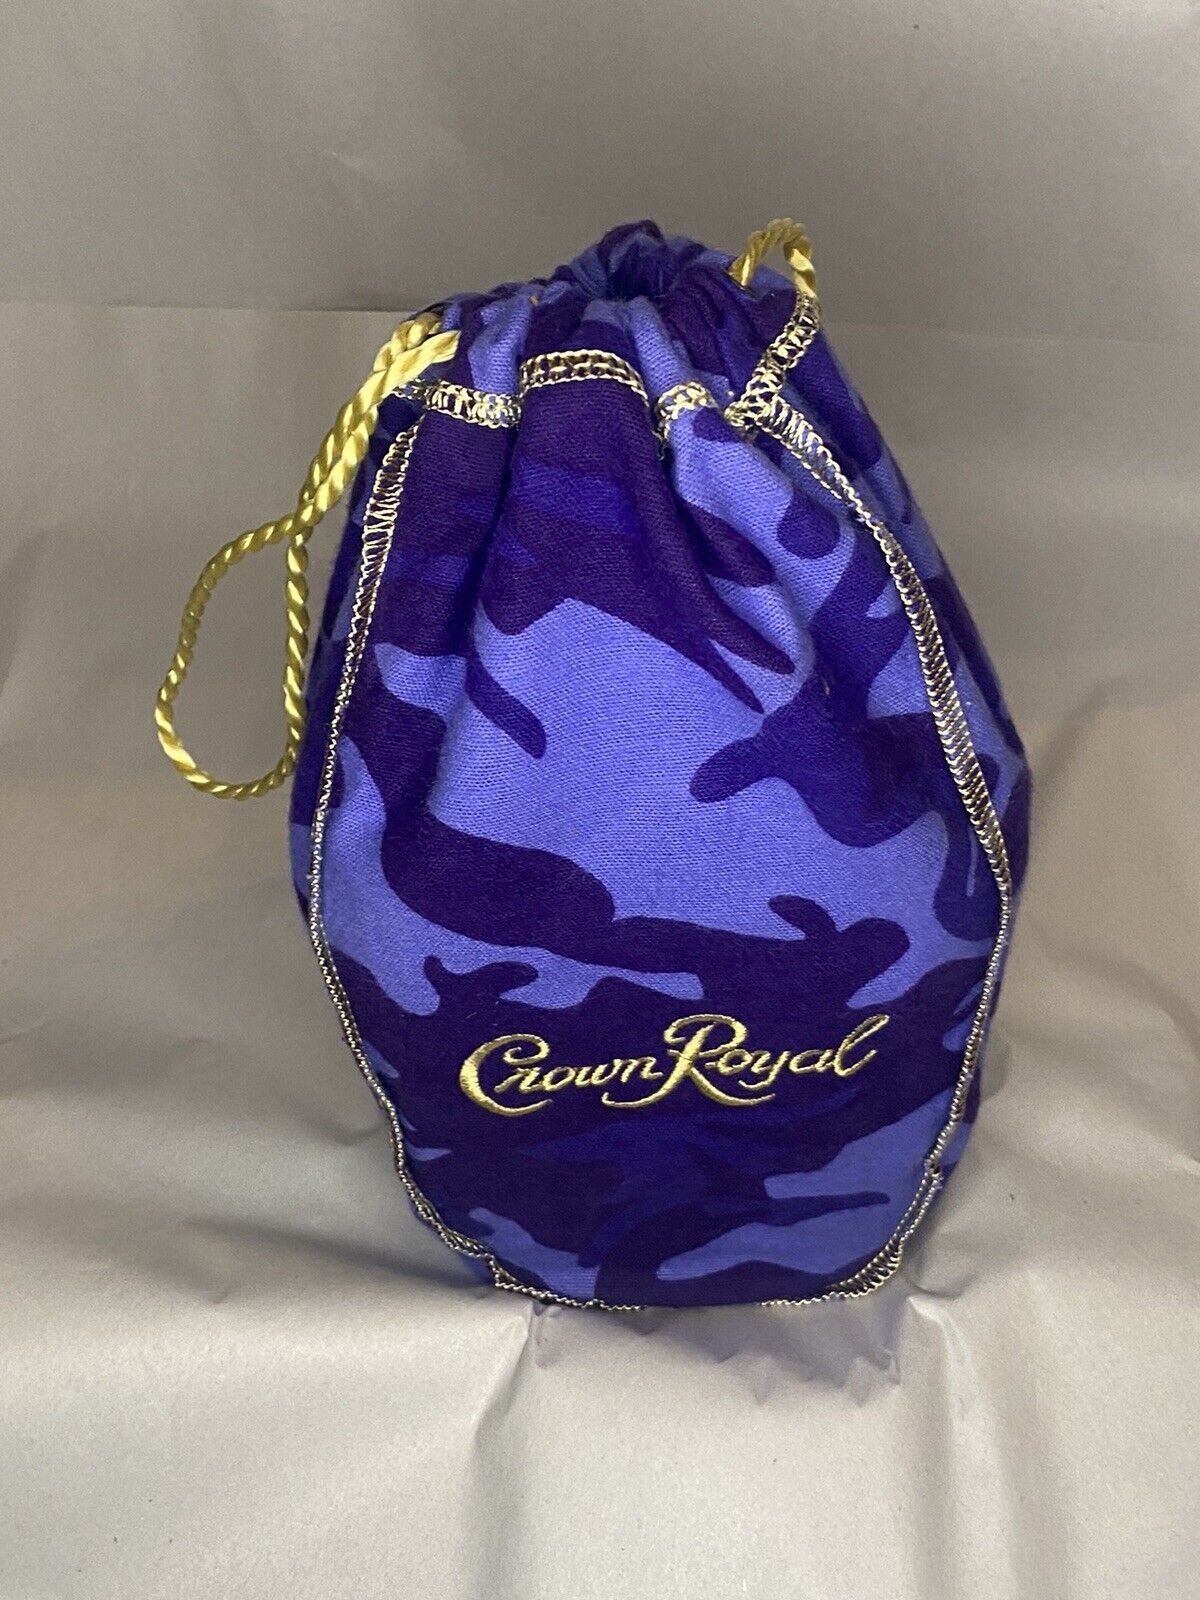 Rare/Discontinued. Crown Royal Camo Bag Blue Camouflage Version